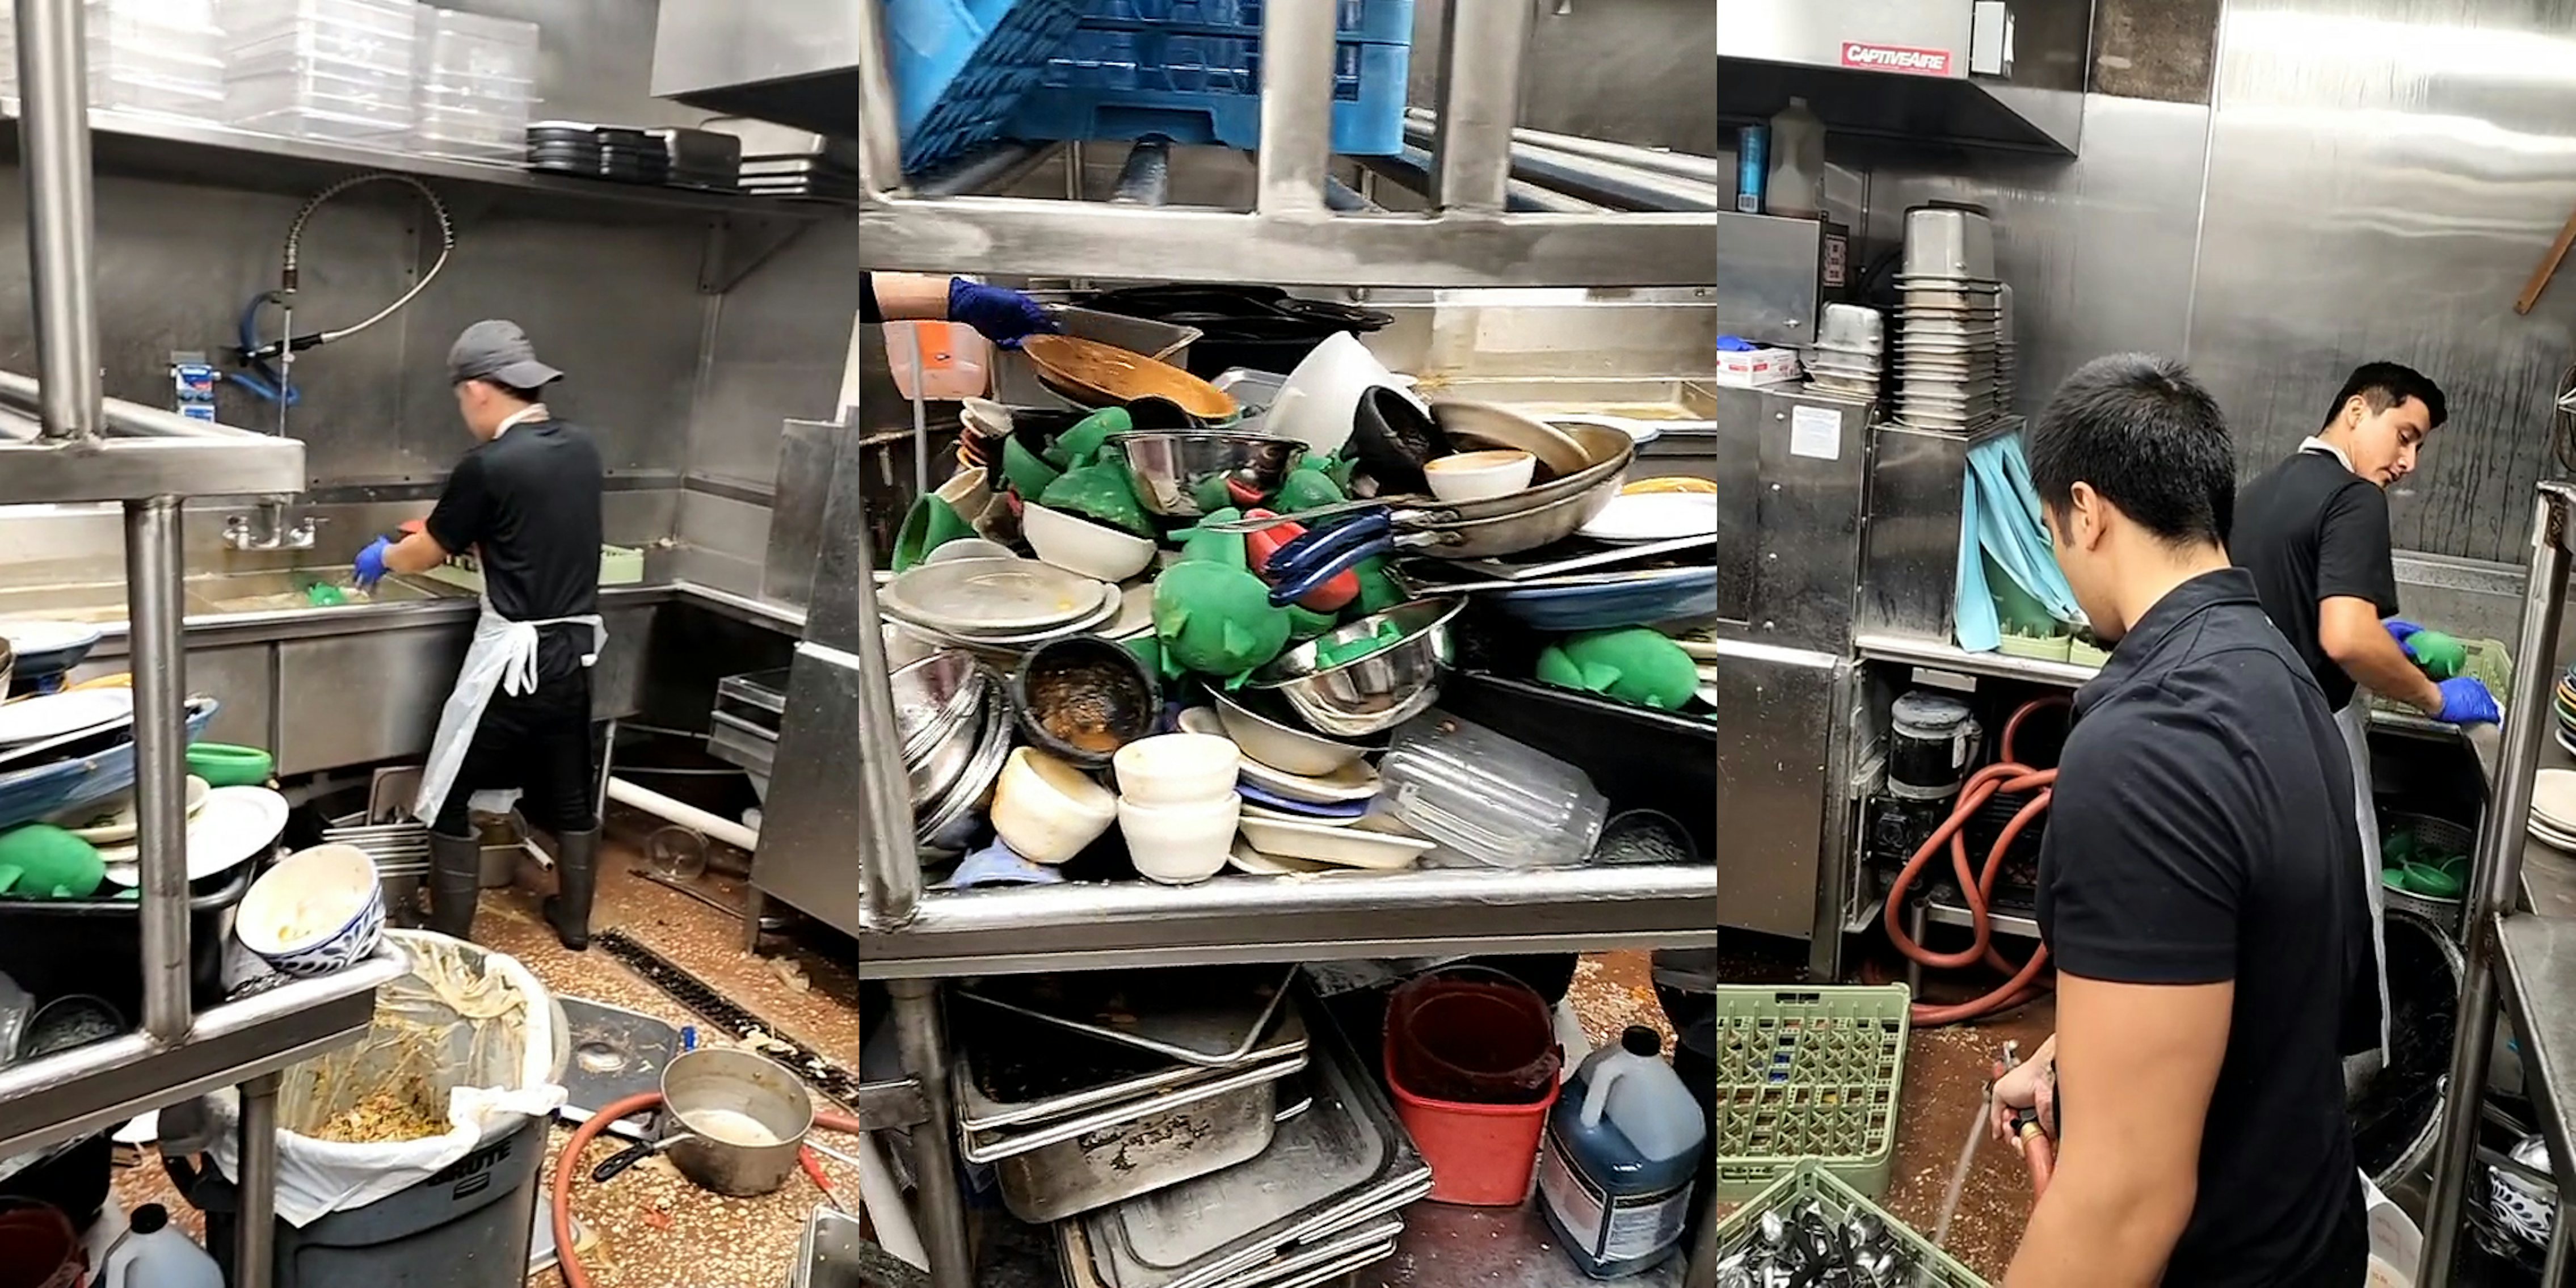 worker washing dishes in sink with dishes piled everywhere (l) massive pile of dirty dishes (c) workers washing dirty dishes (r)